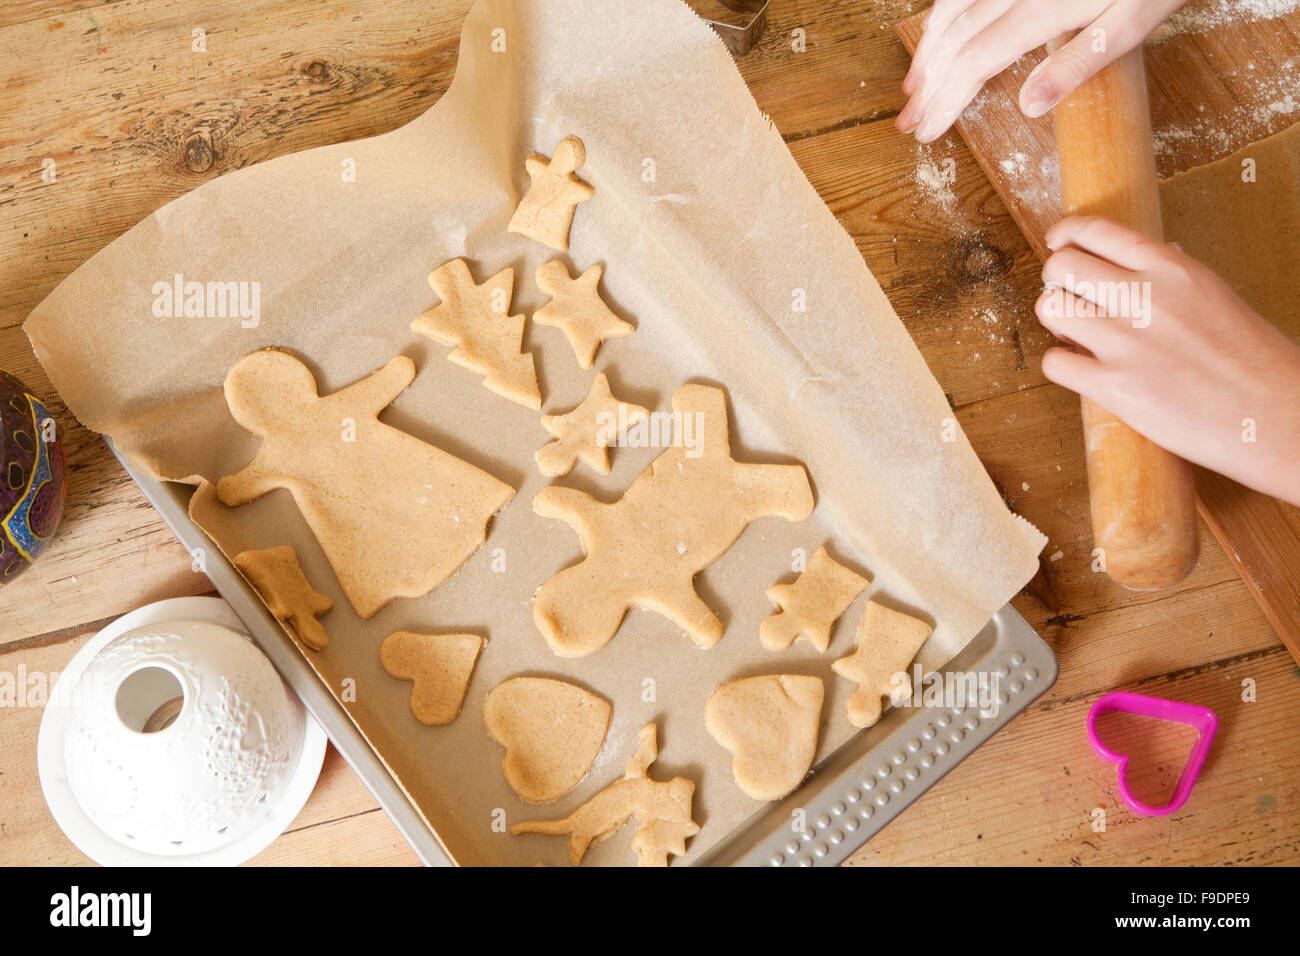 The making of gingerbread is a time honored tradition at Christmas. The gingerbread is cut from the dough and placed on a tray, Stock Photo